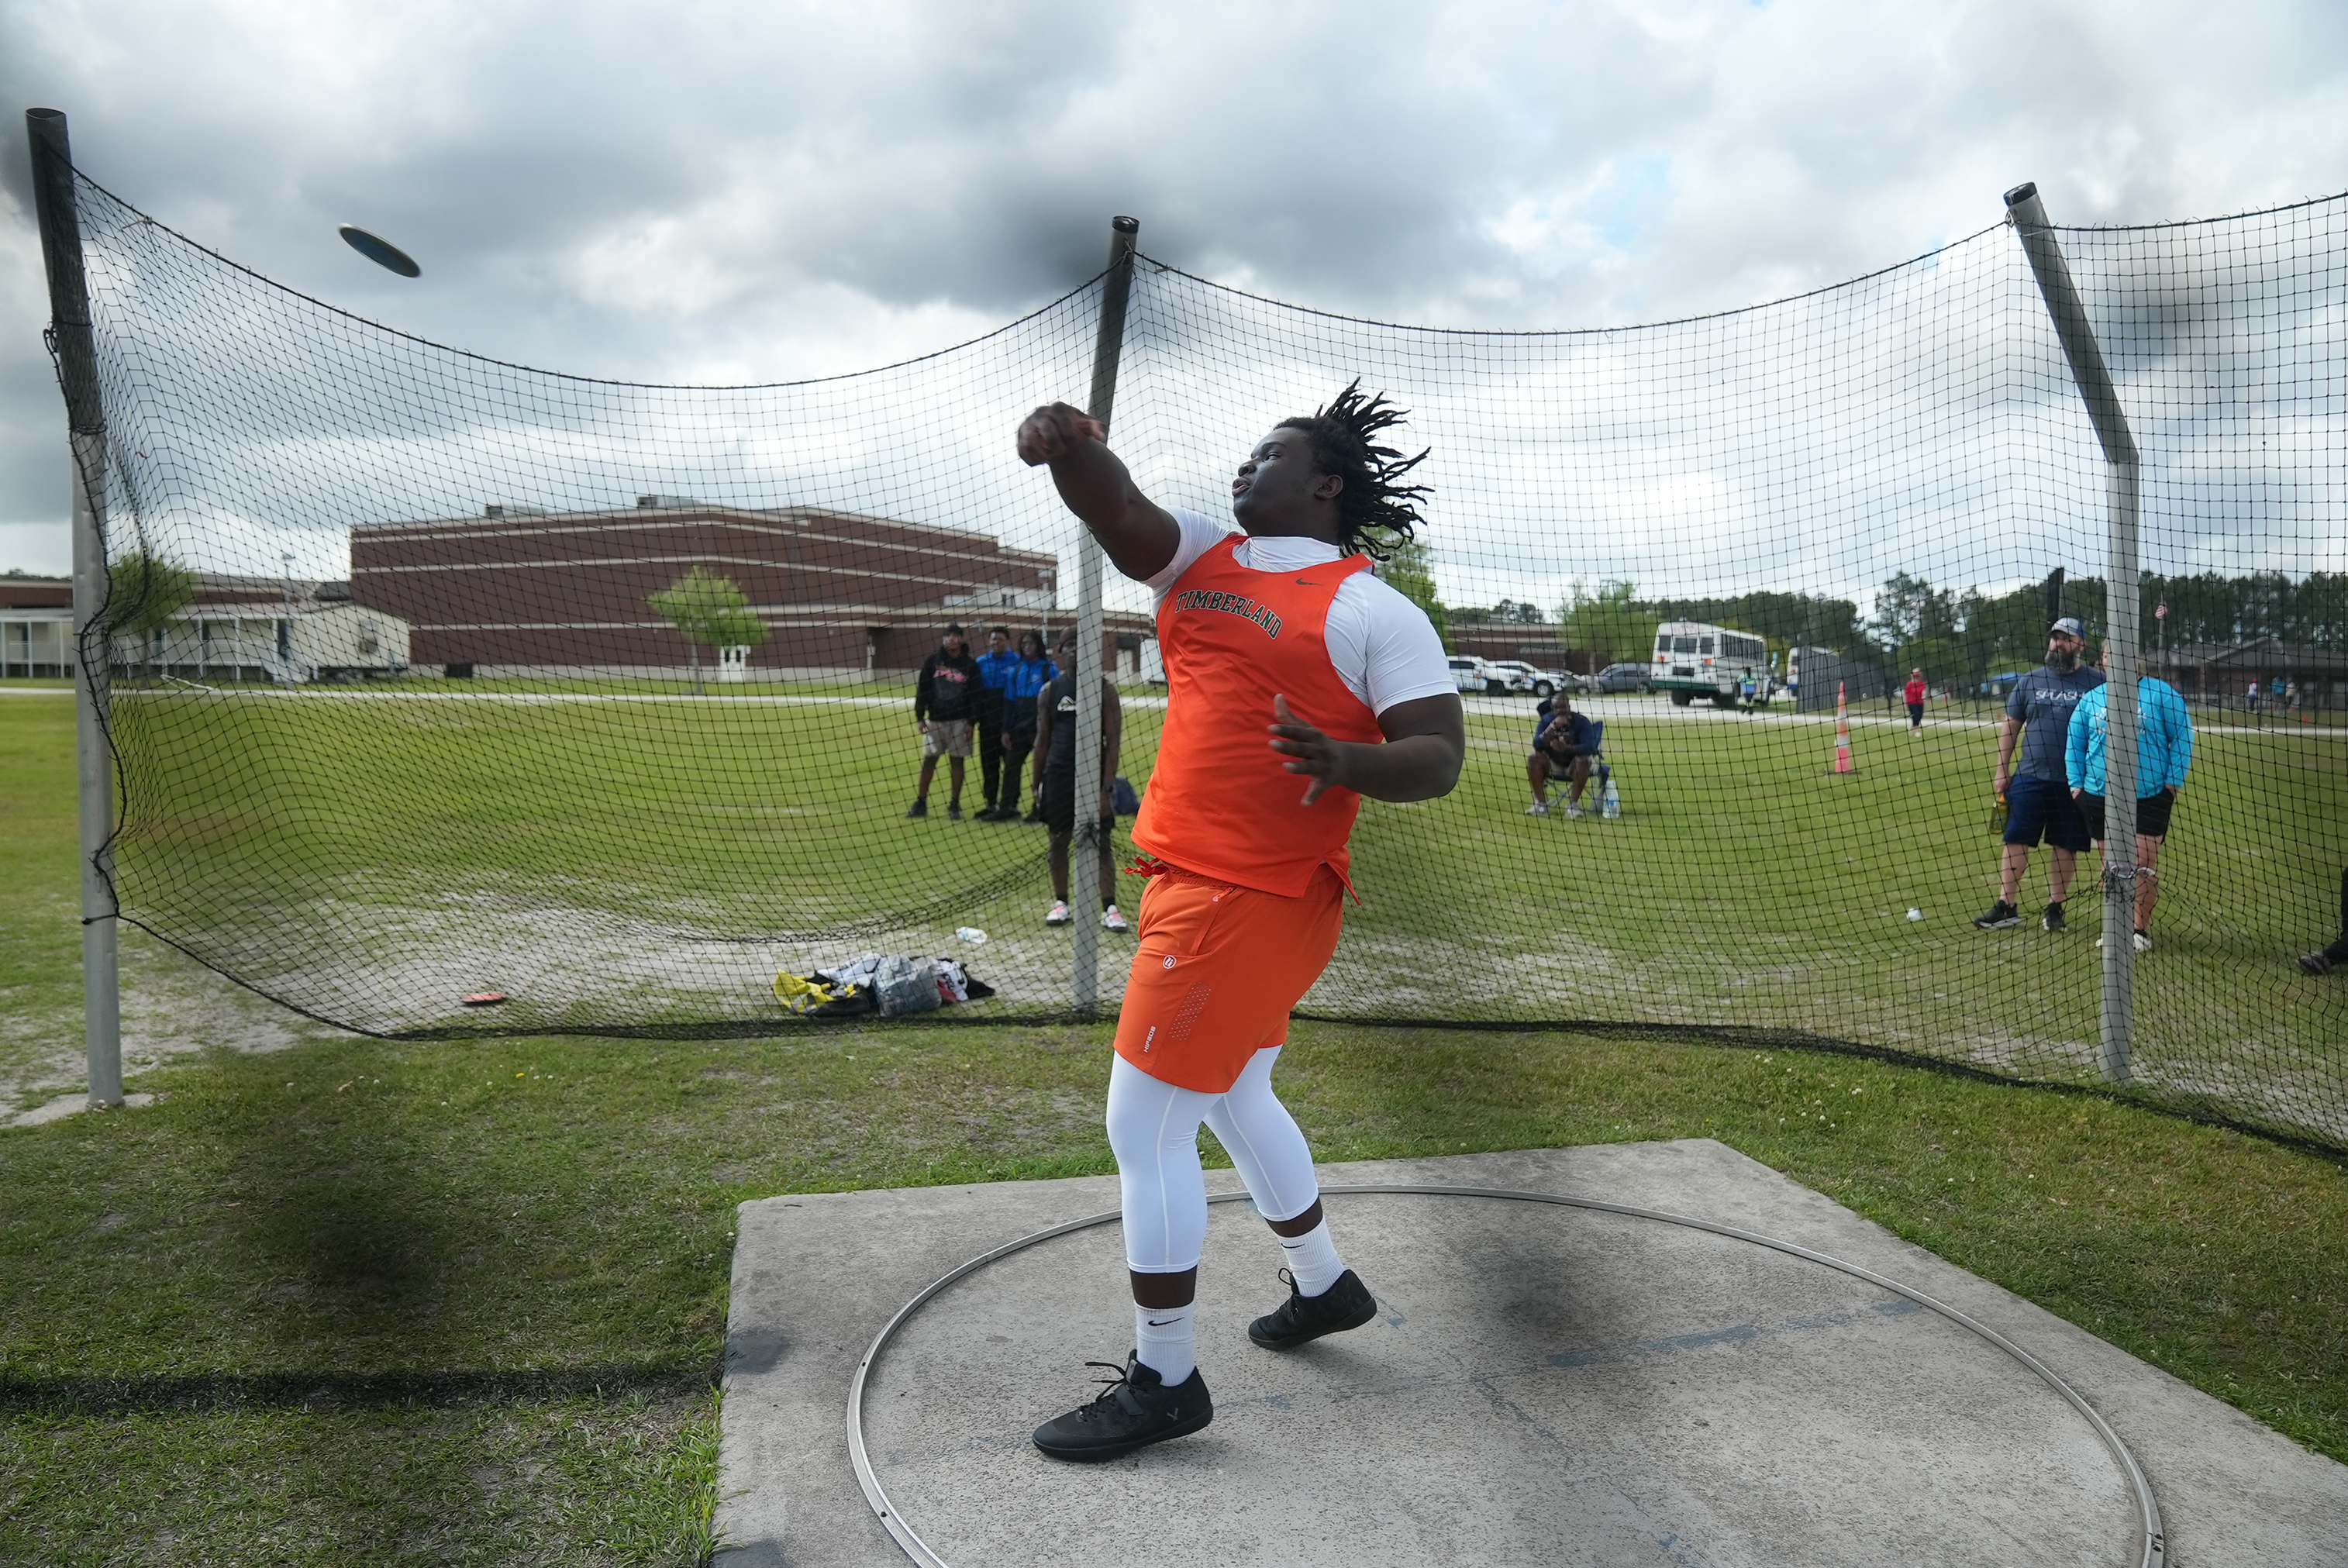 THS student throwing discus